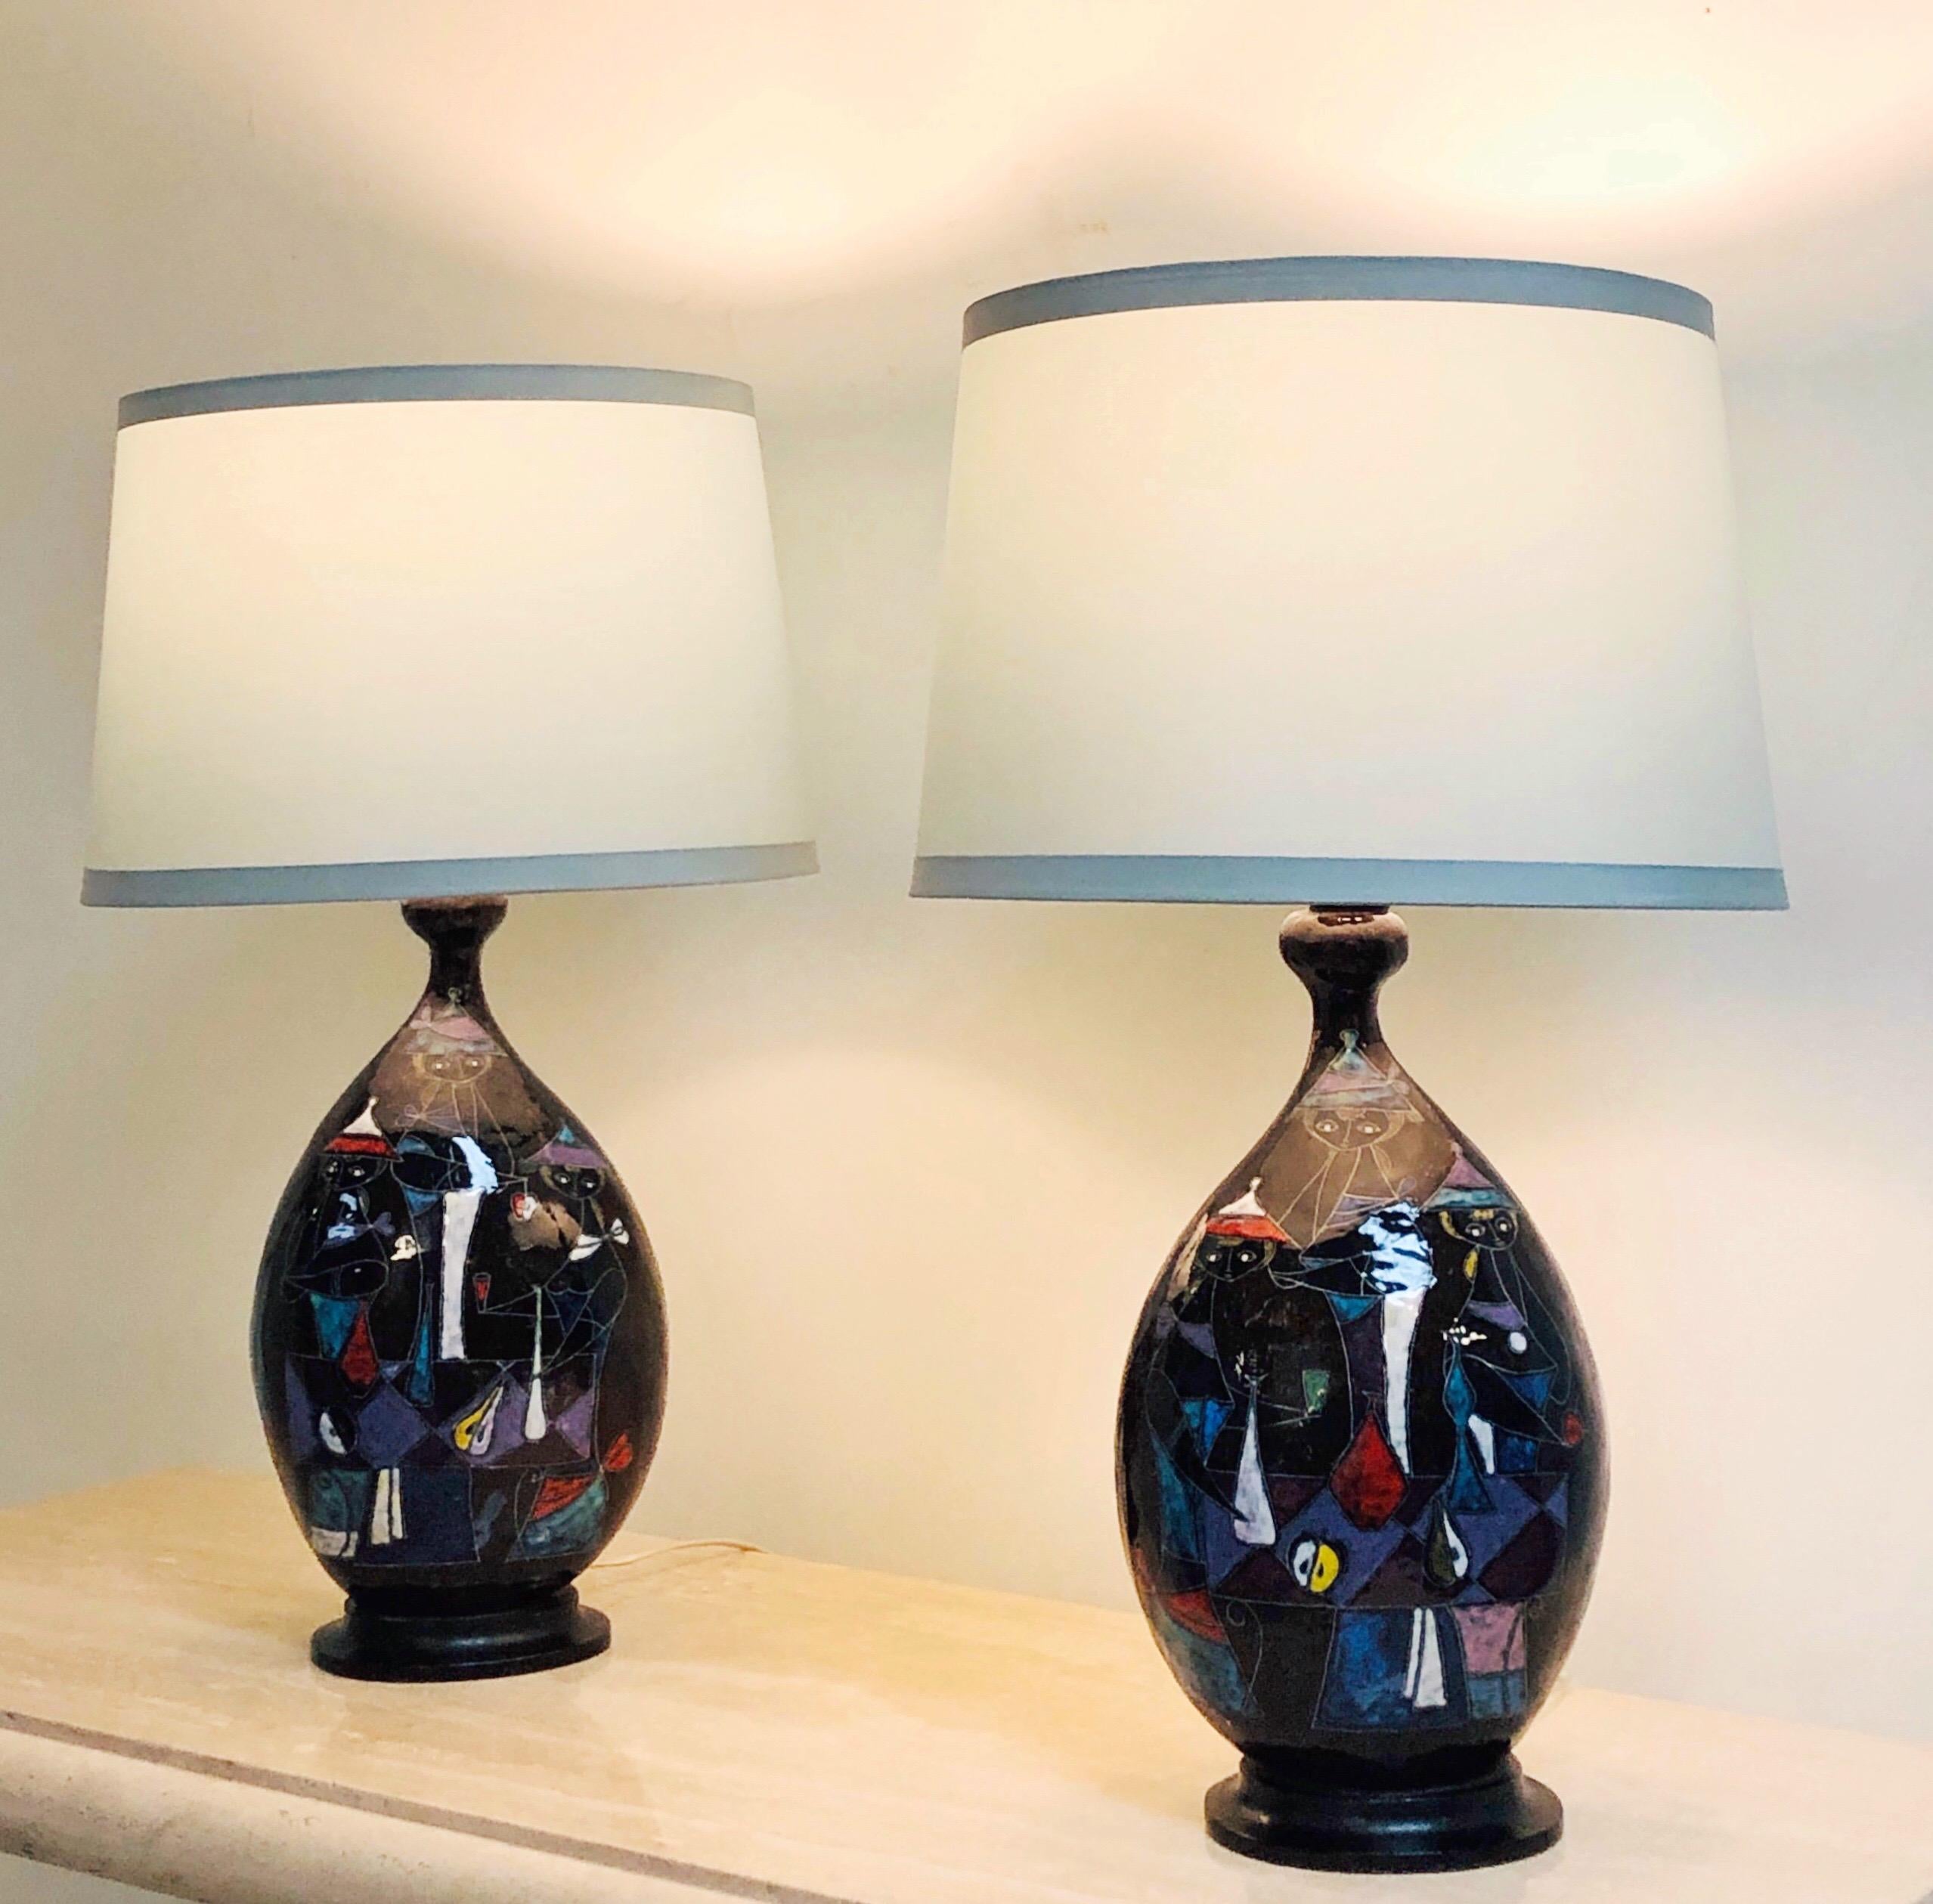 Fantoni Pair of Ceramic Table Lamps Abstract Mid Century 1